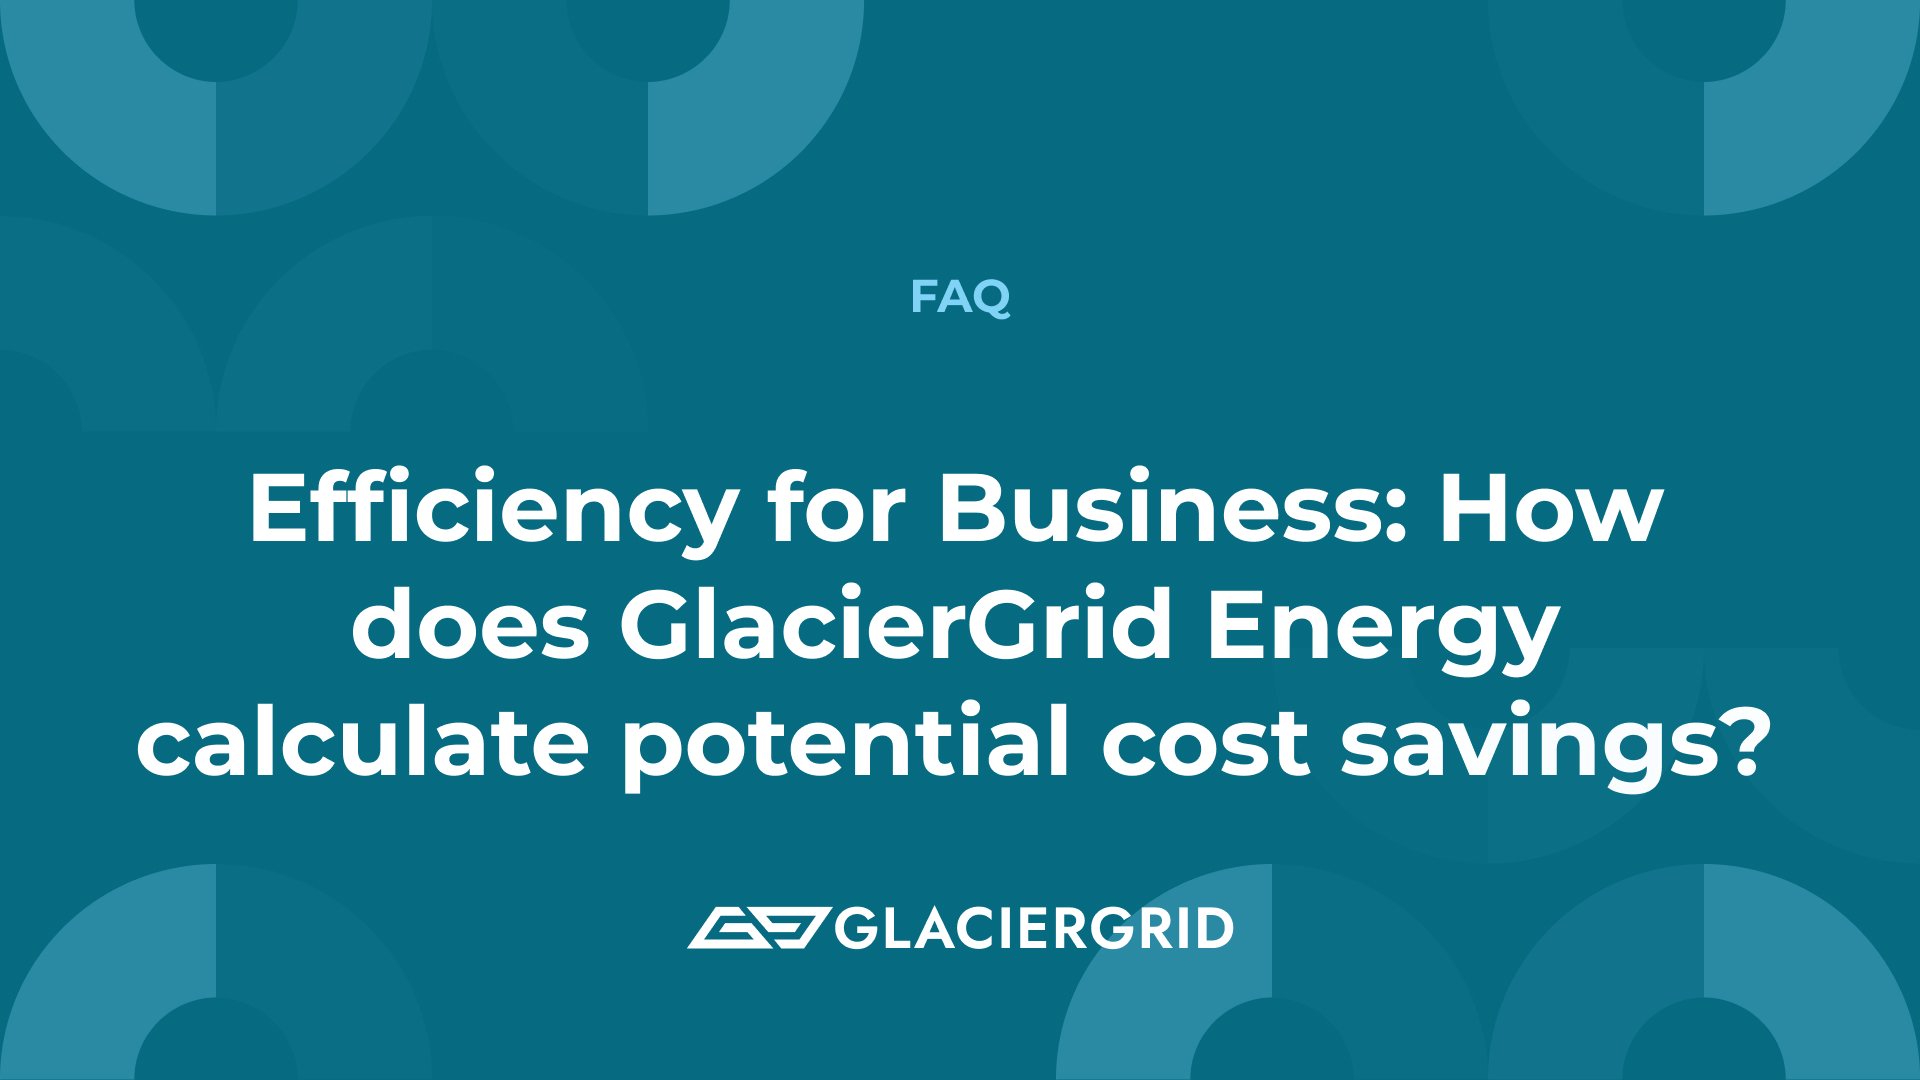 Efficiency for Business: How does GlacierGrid Energy calculate potential cost savings?